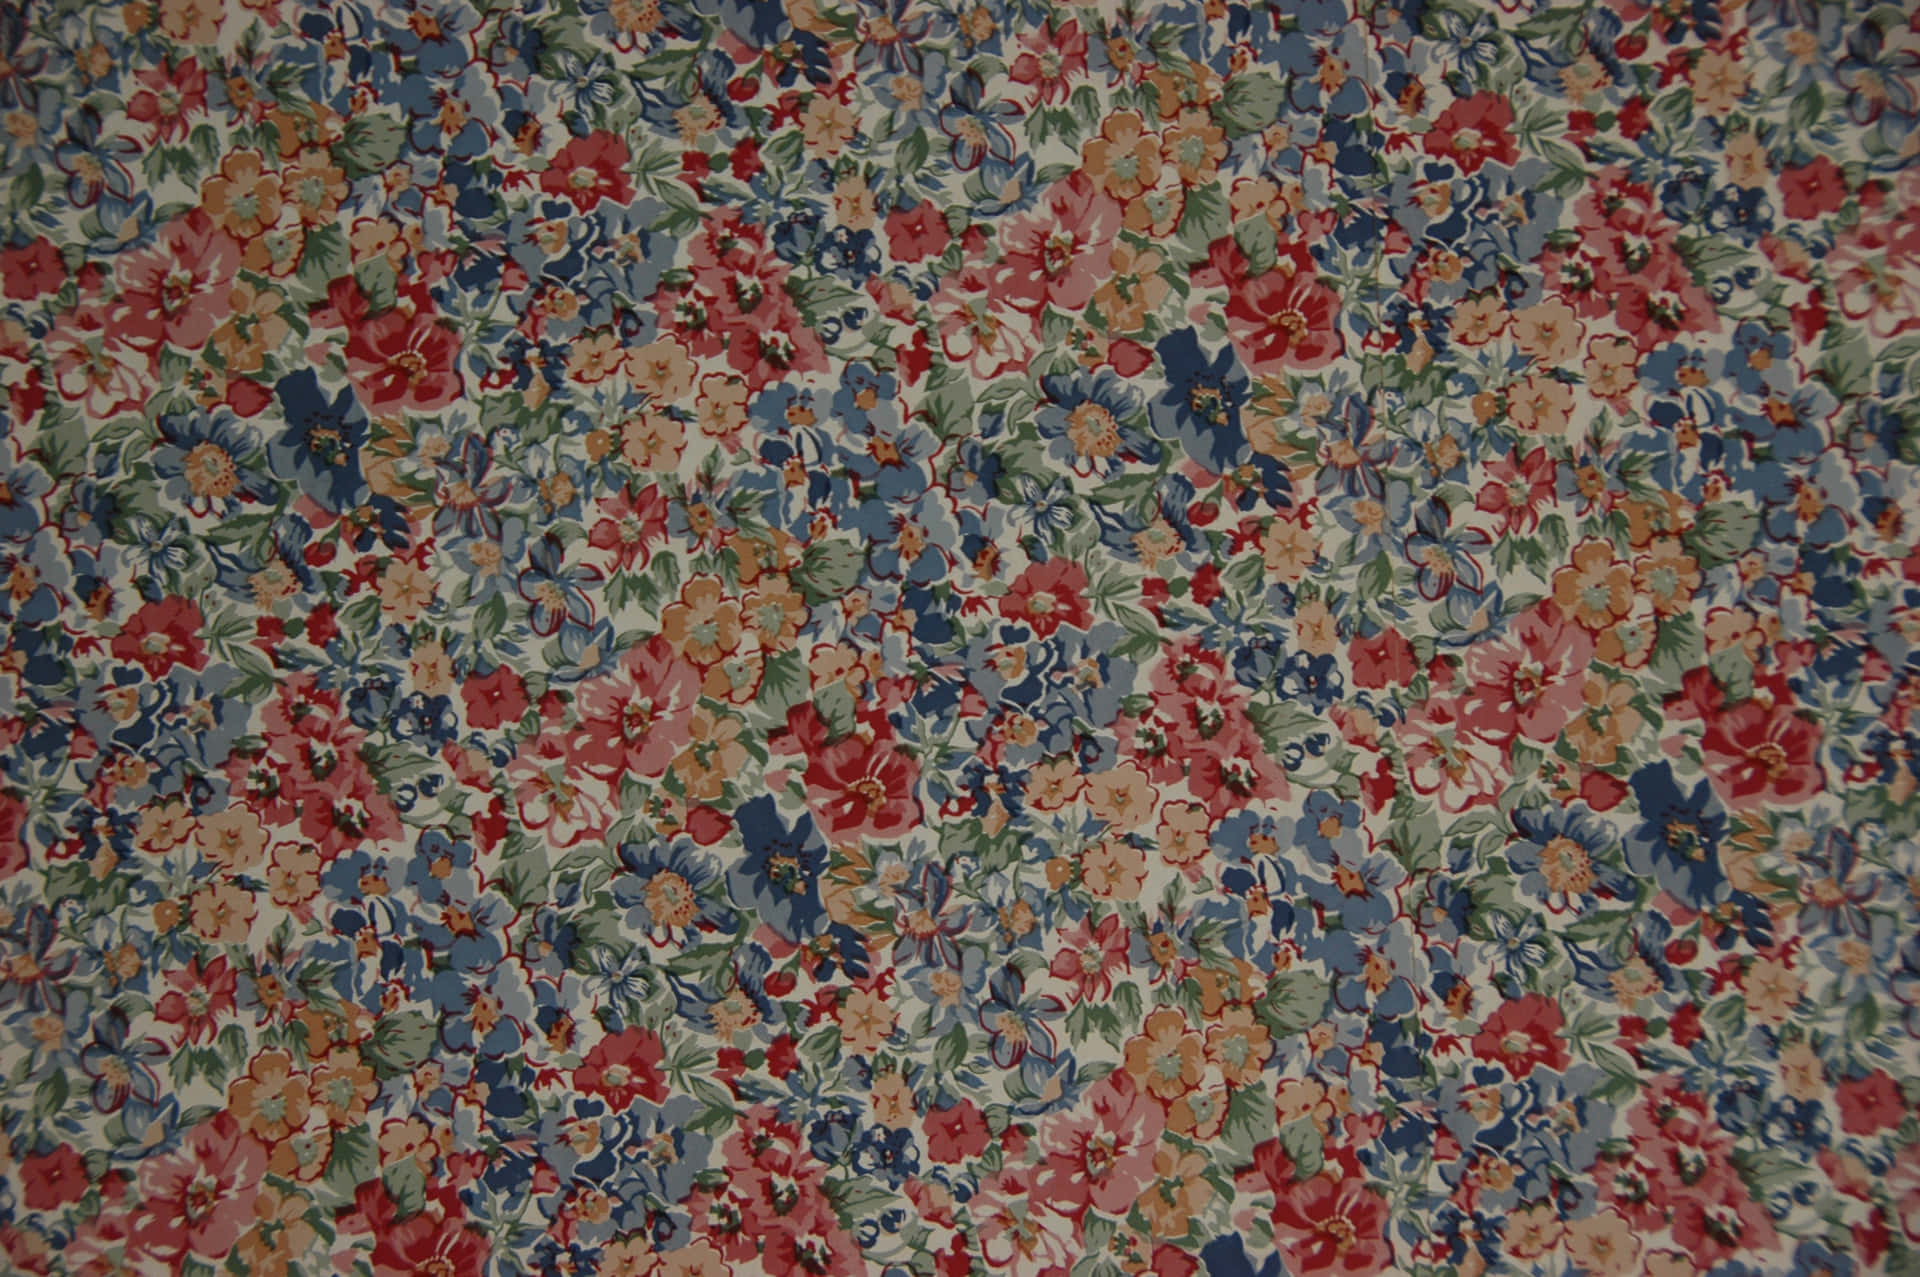 A Close Up Of A Floral Fabric Wallpaper